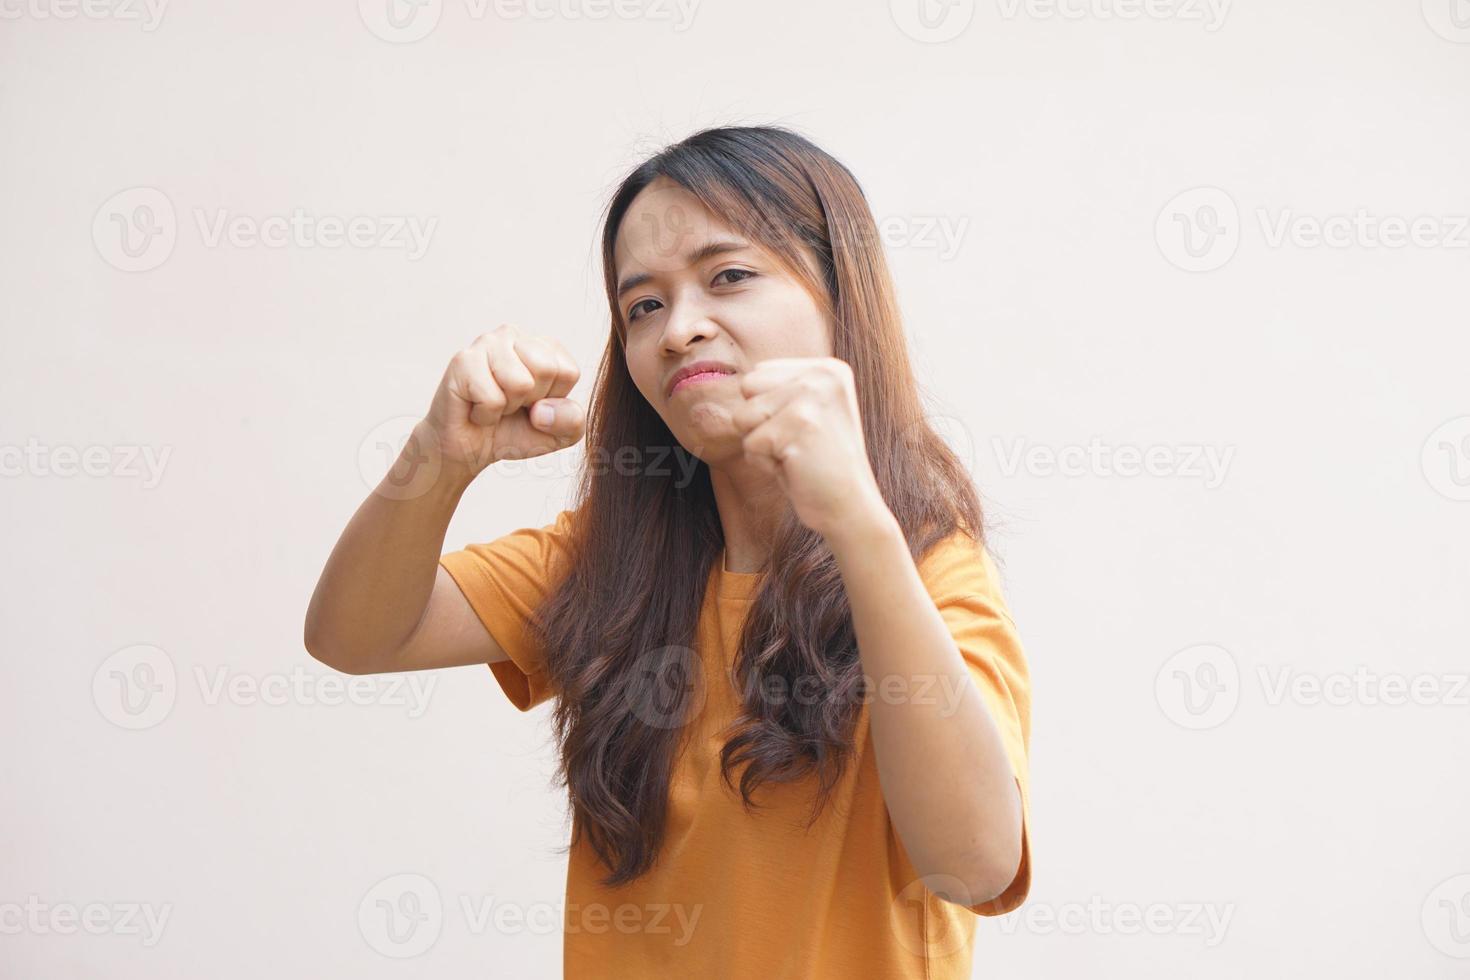 Asian woman raising her fist out of anger photo